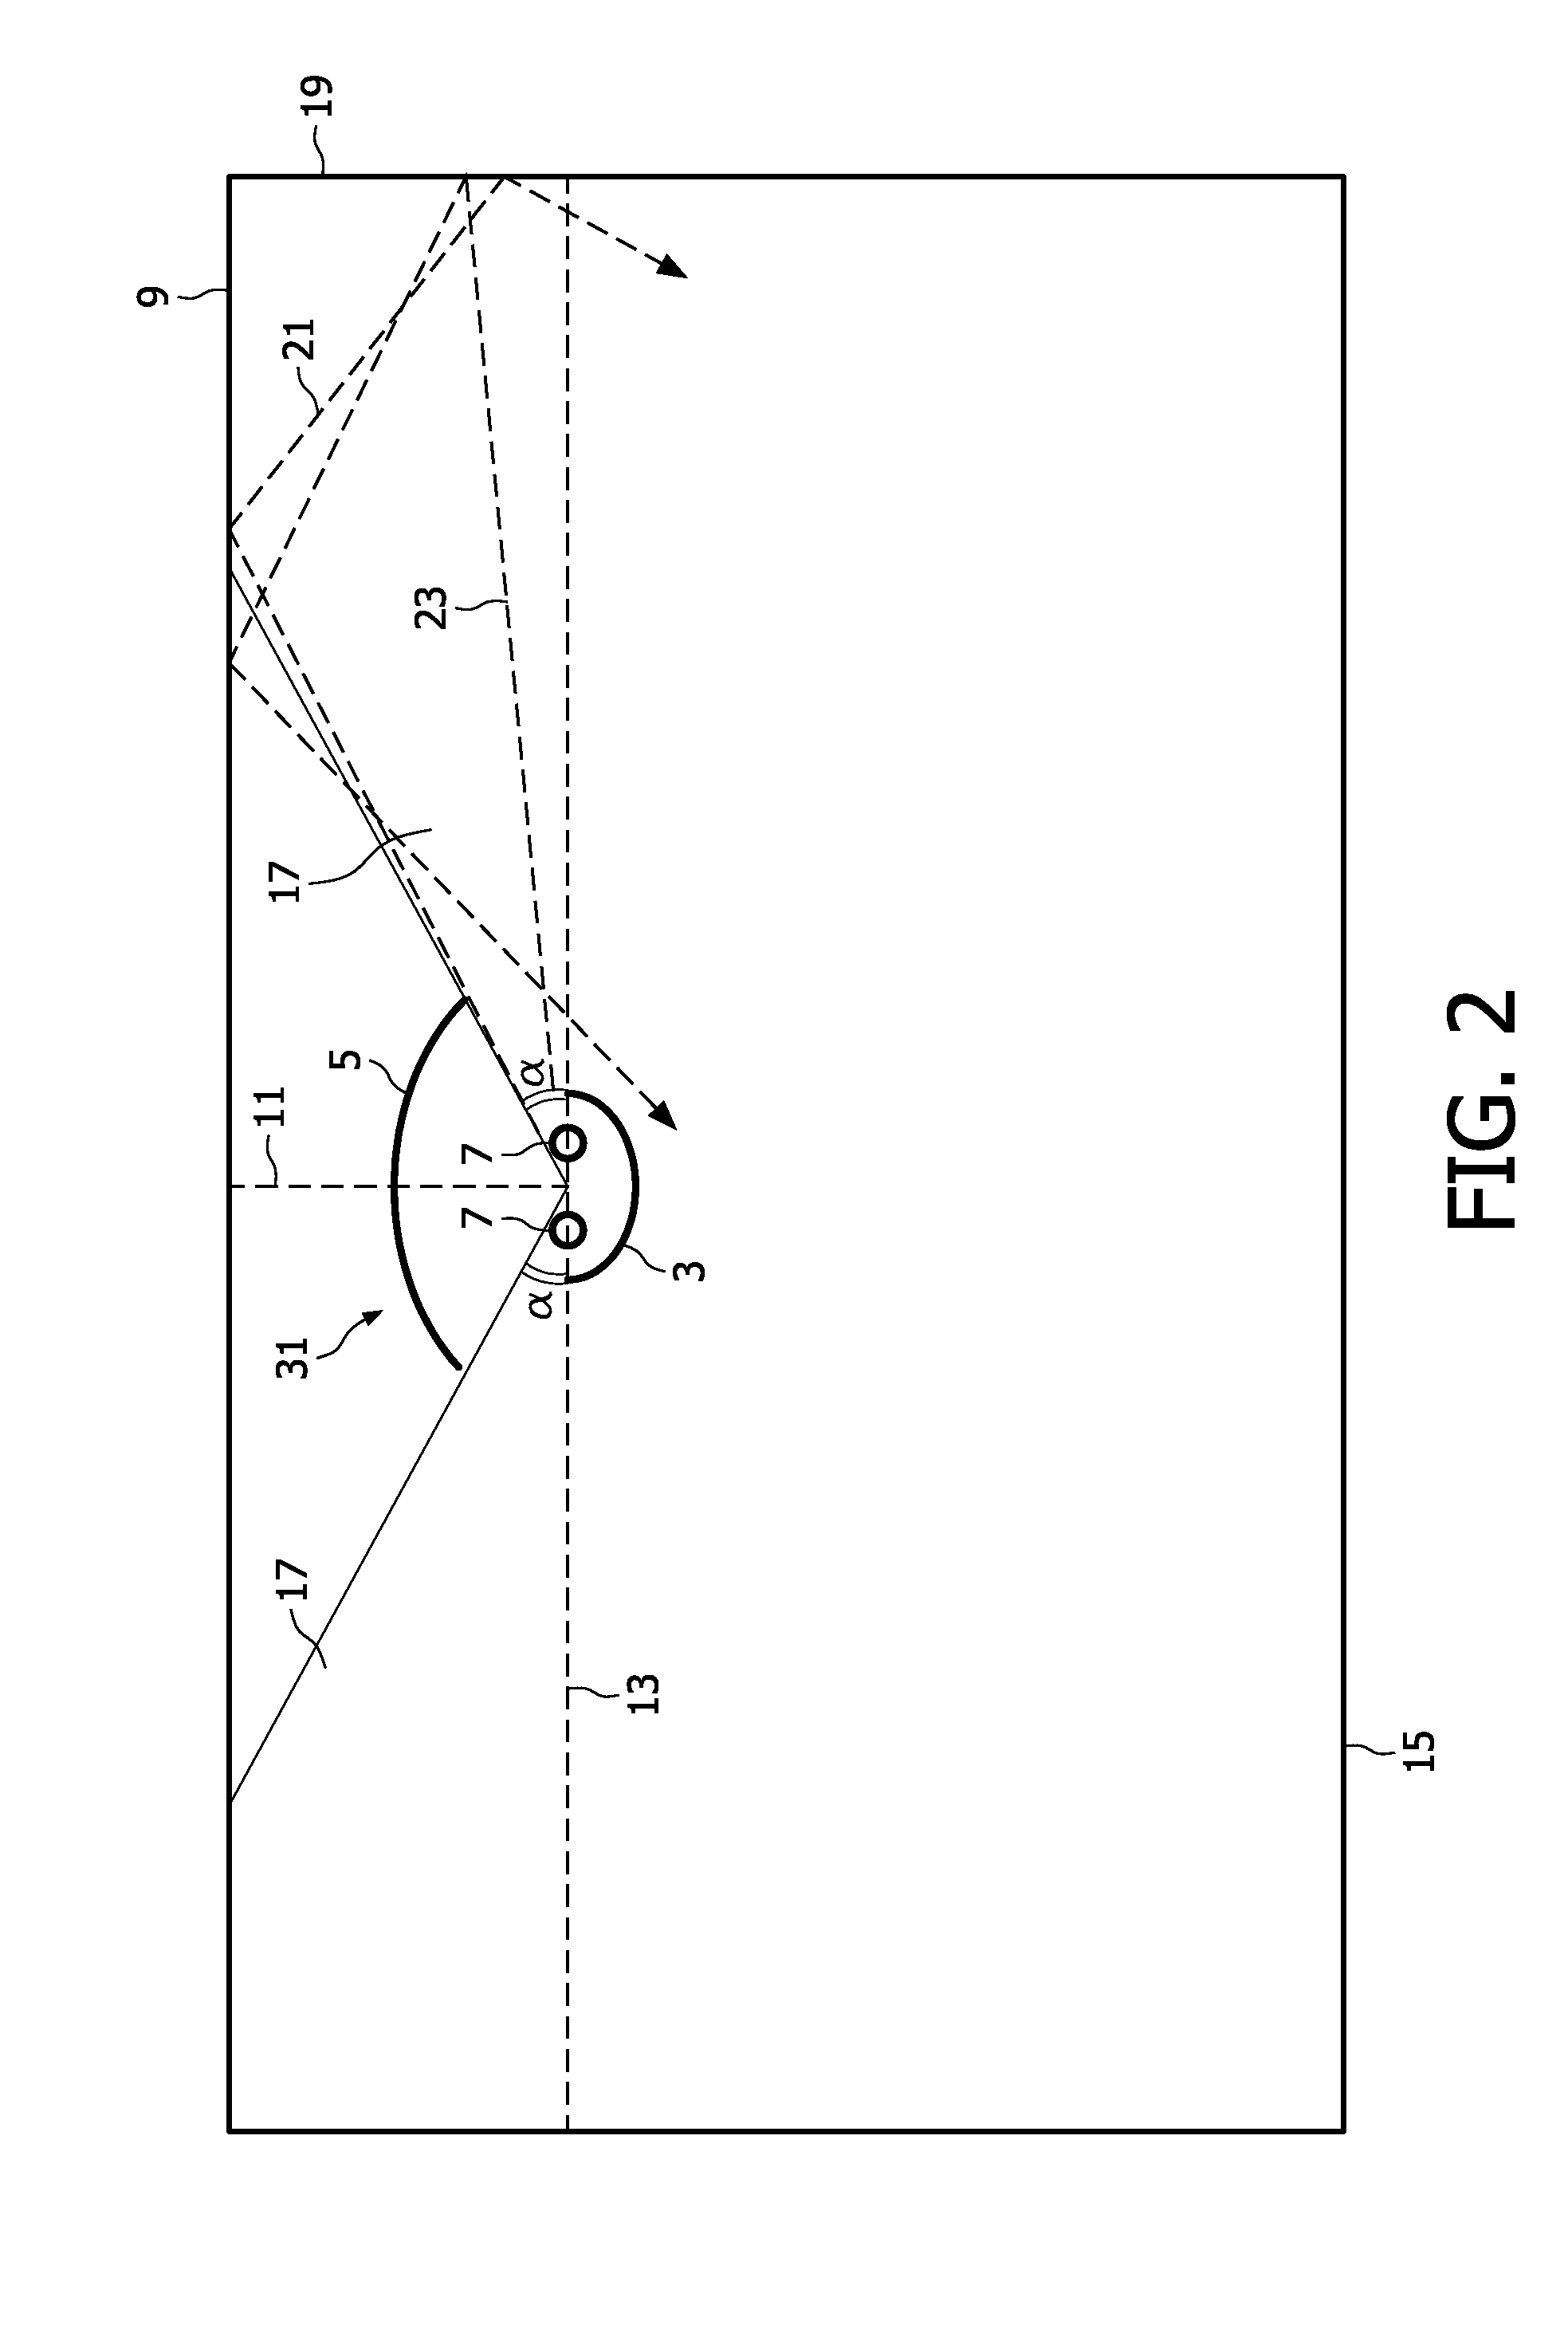 Air purification system, method for purifying air inside a structure